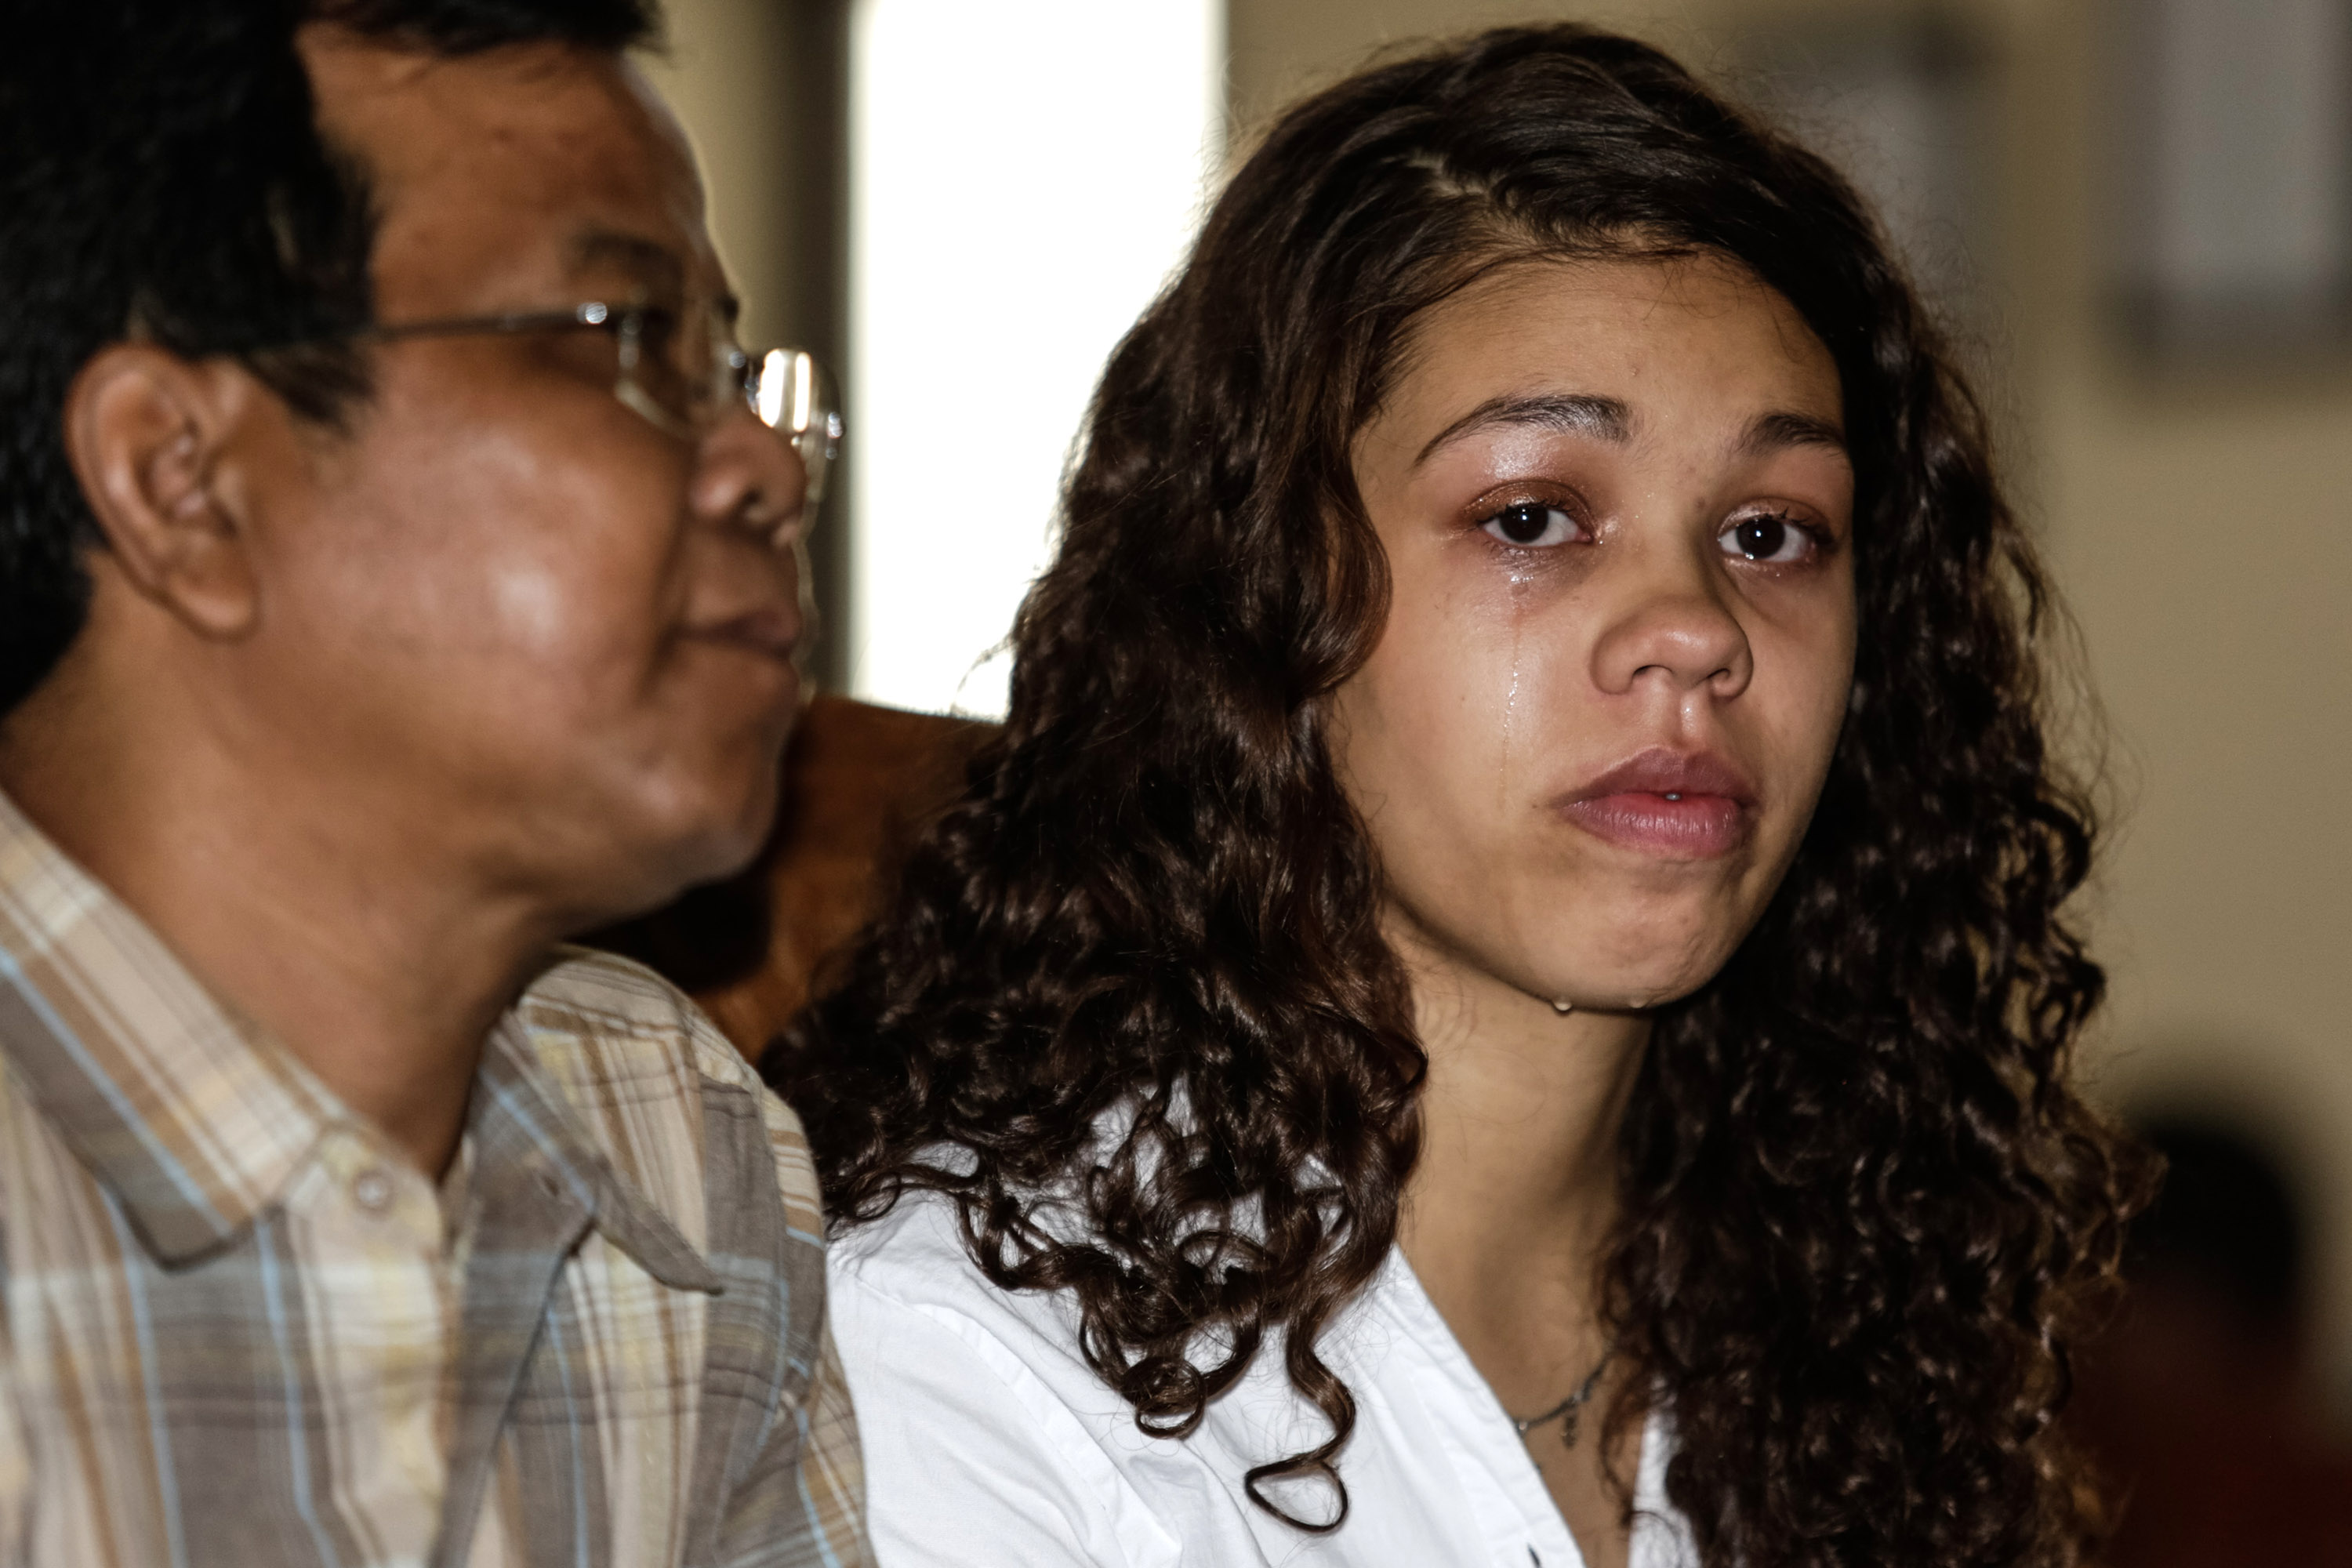 Heather Mack gets 26 years in prison for role in mother's 2014 murder